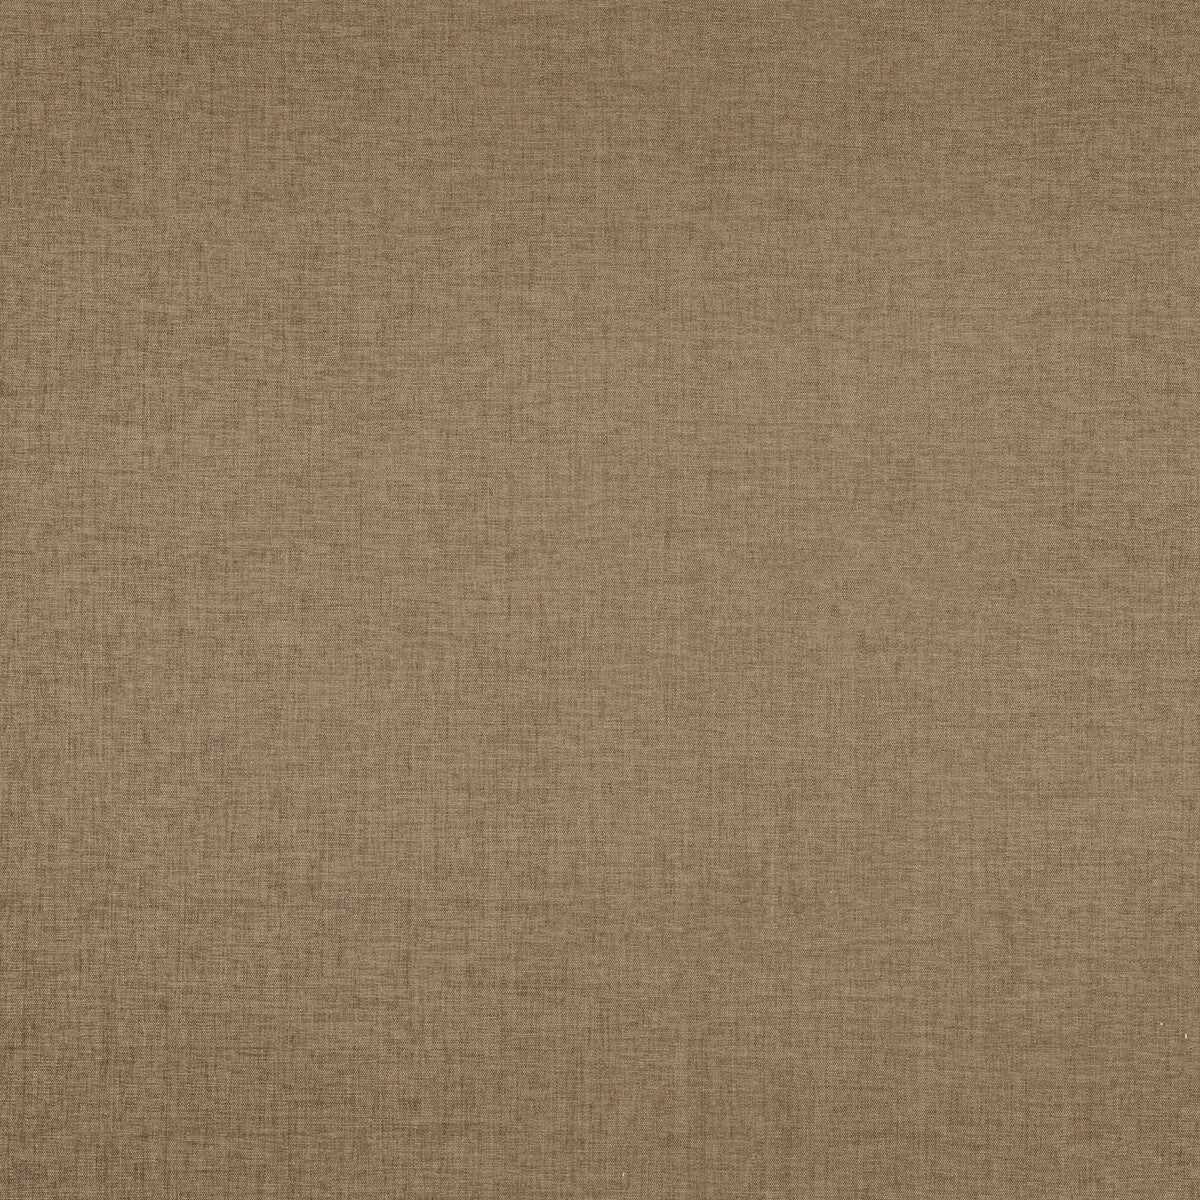 Kravet Smart fabric in 36095-1616 color - pattern 36095.1616.0 - by Kravet Smart in the Eco-Friendly Chenille collection